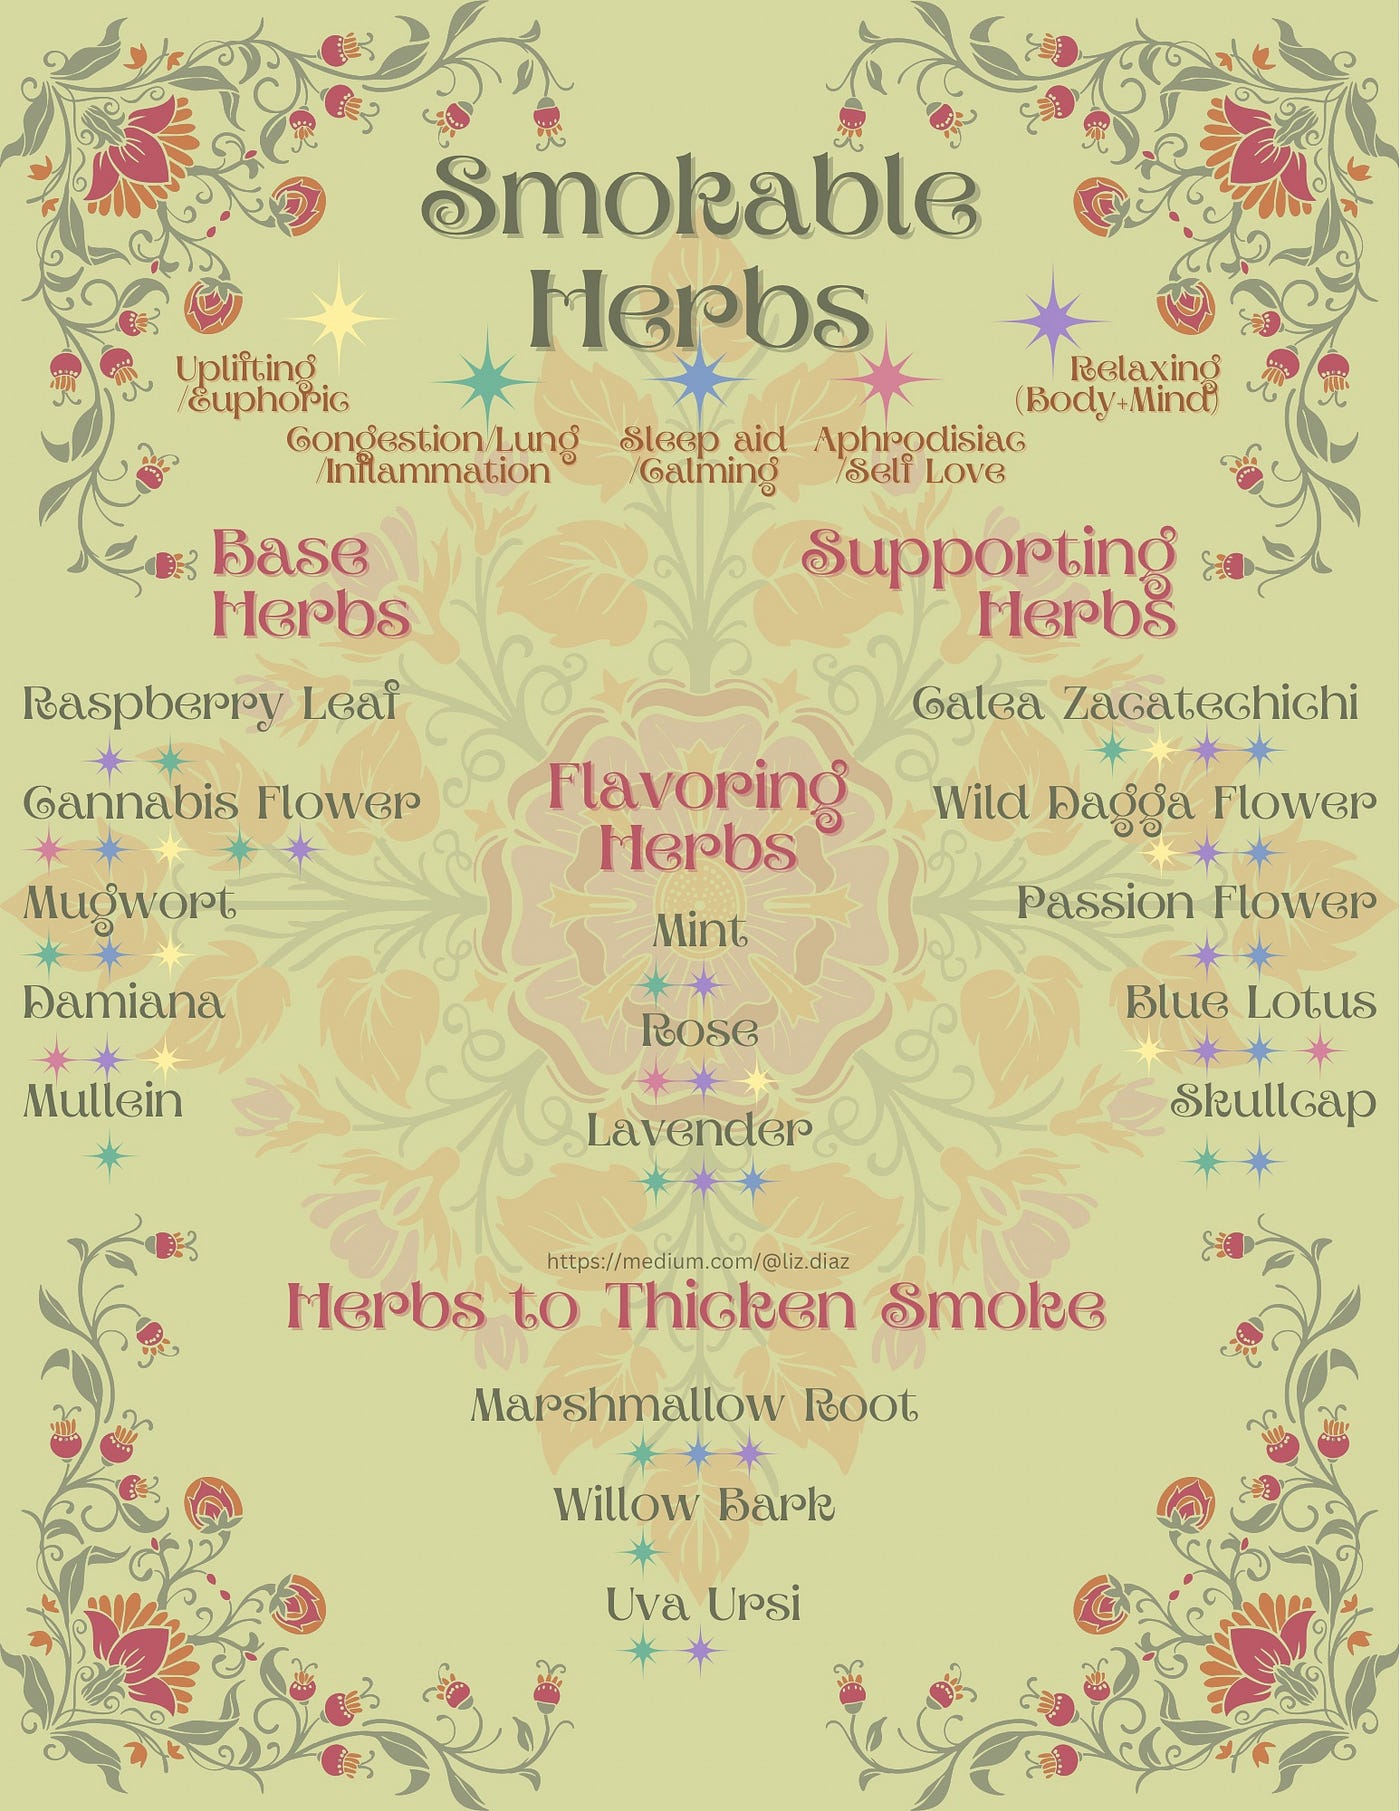 16 Smokable Herbs + Guide on How to Make Your Own Herbal Blends, by  Elizabeth Diaz